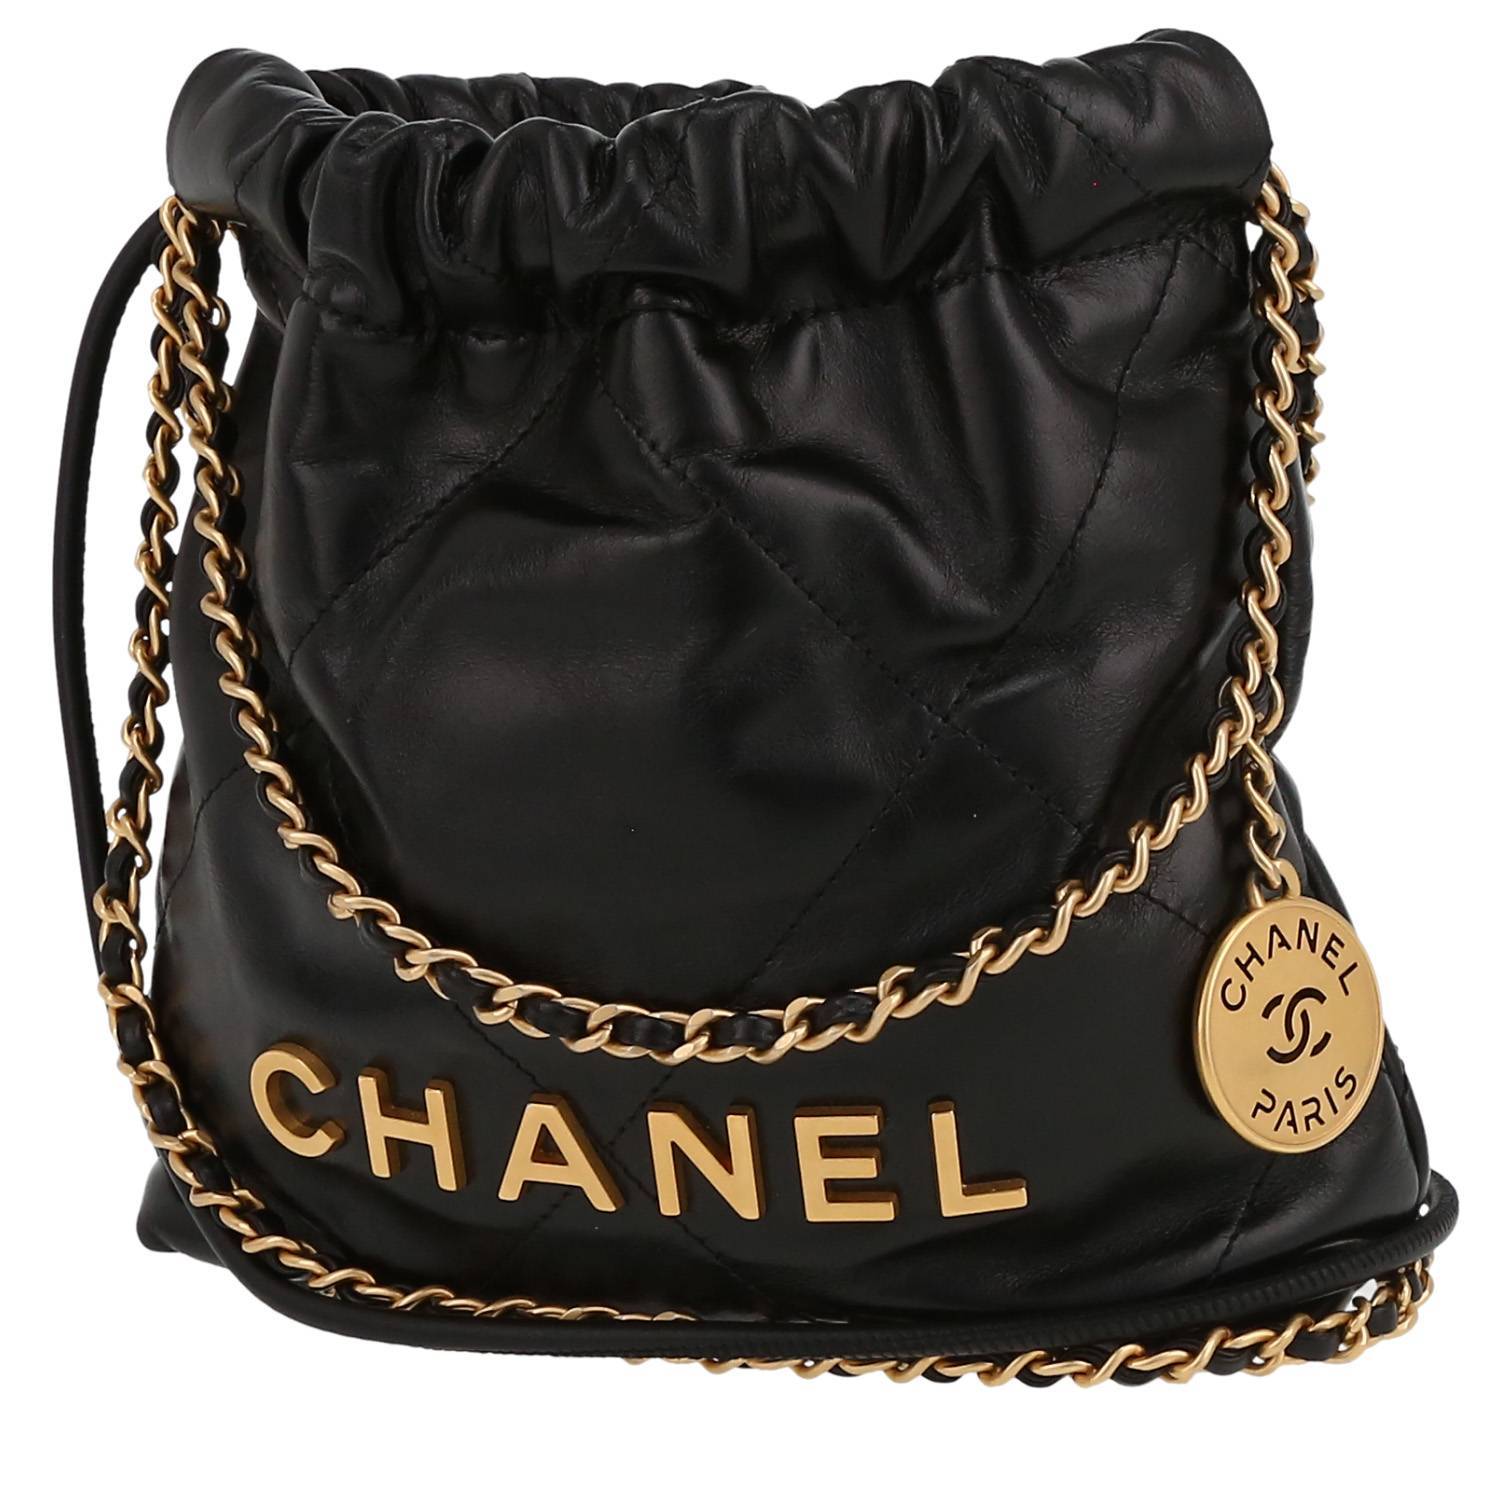 Chanel 22 mini shopping bag in black leather